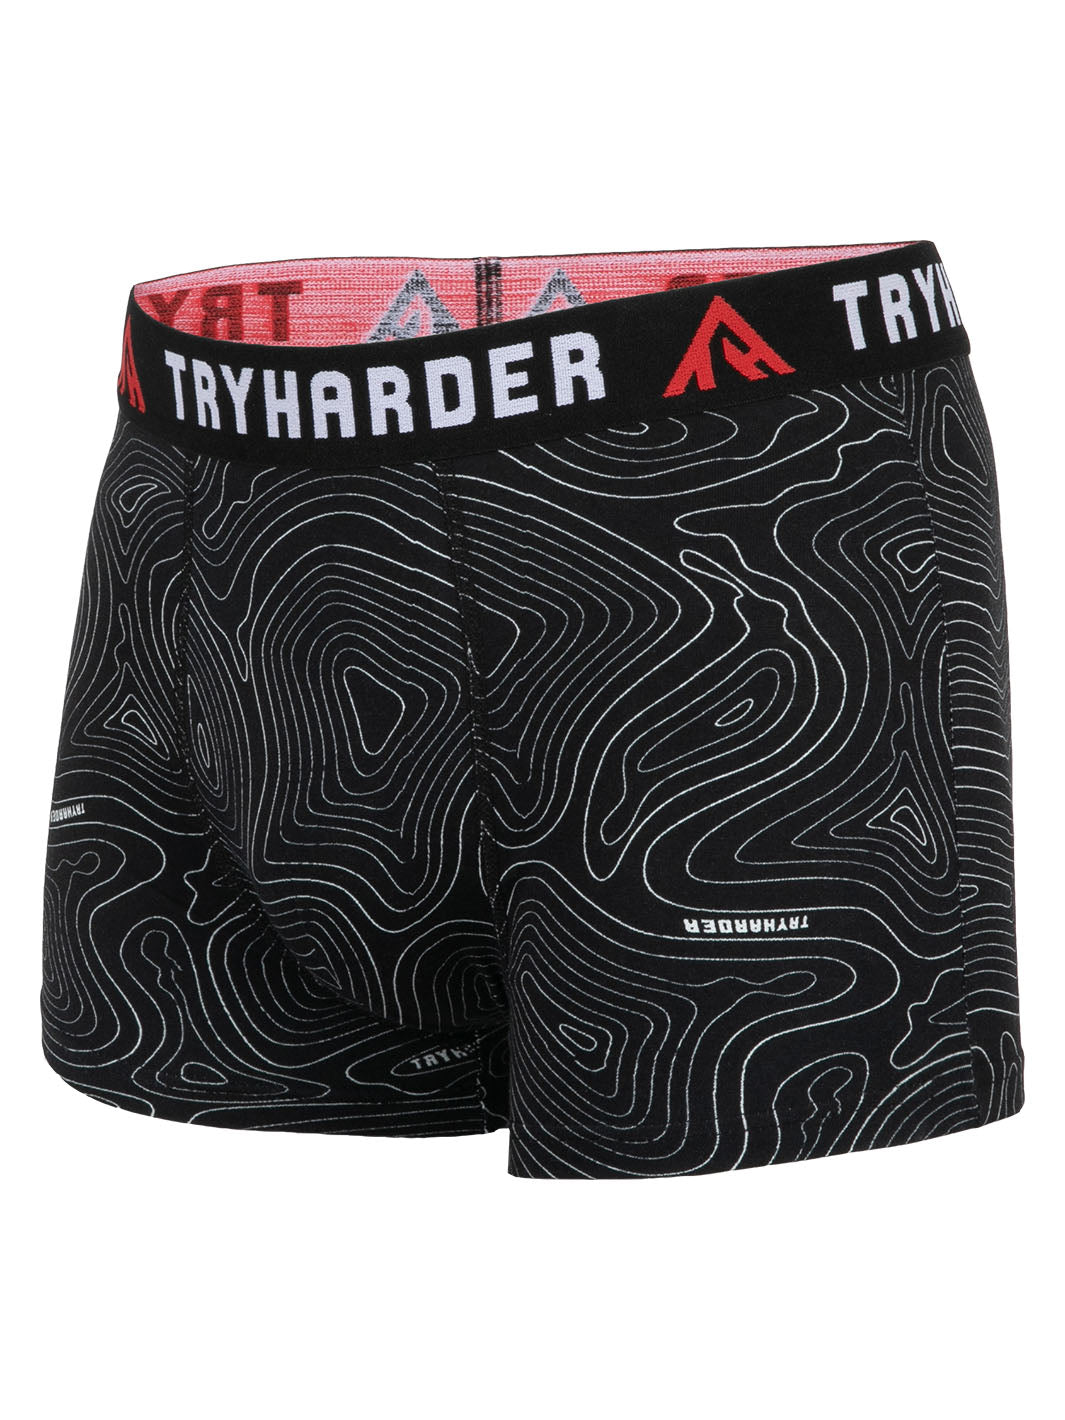 TRYHARDER - Boxer - Labyrinth Black 1 pack